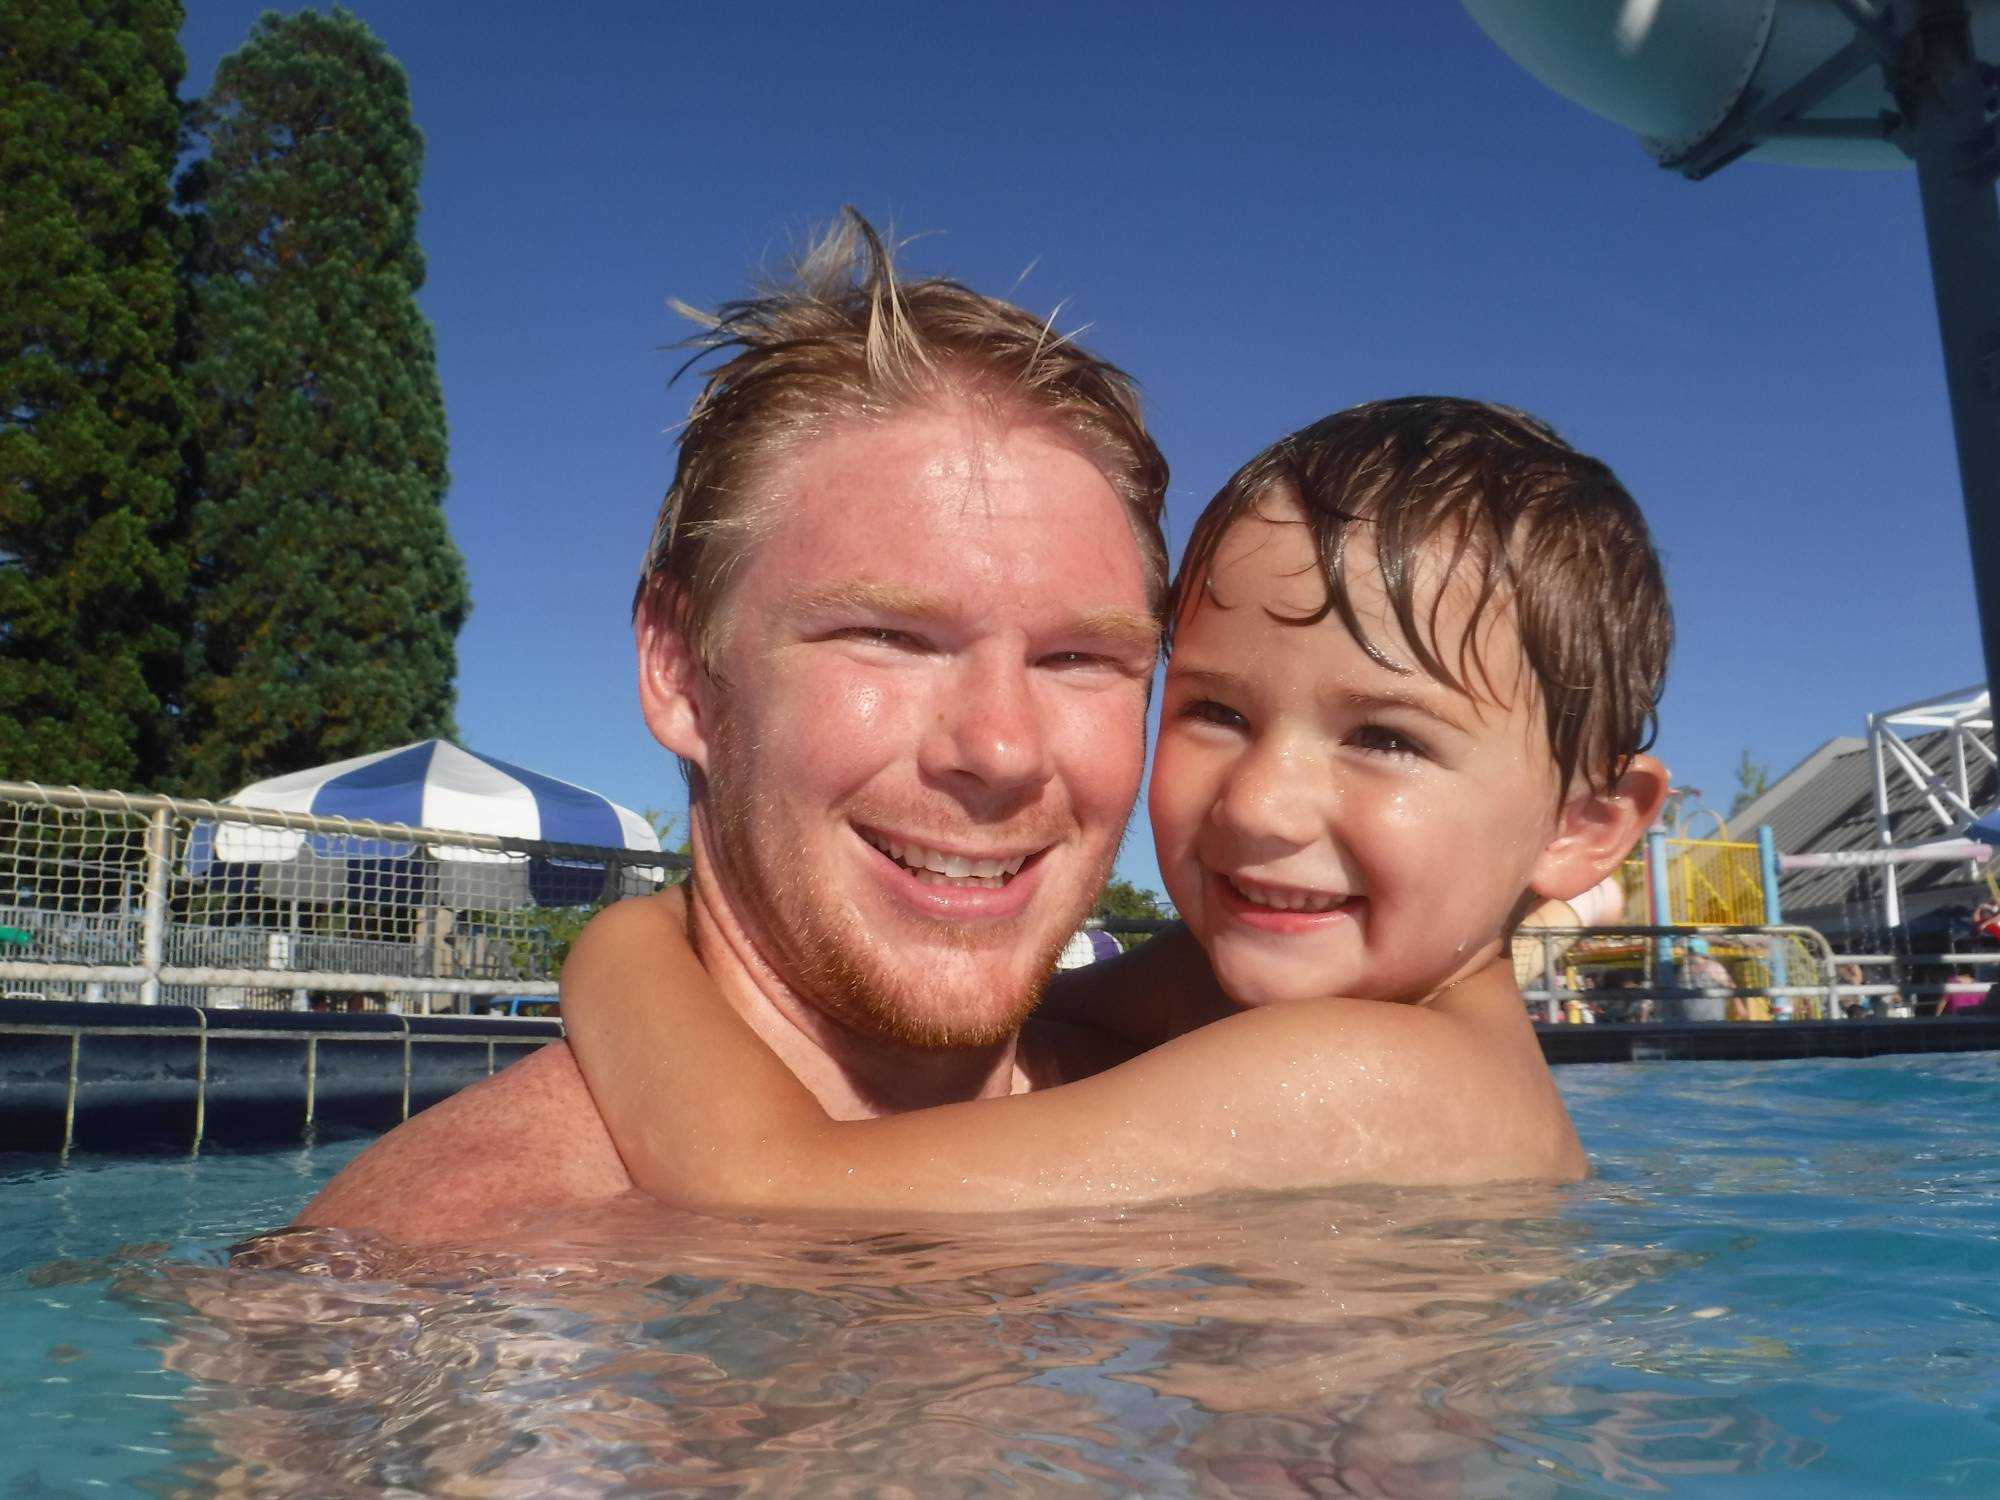 zeth with son swimming